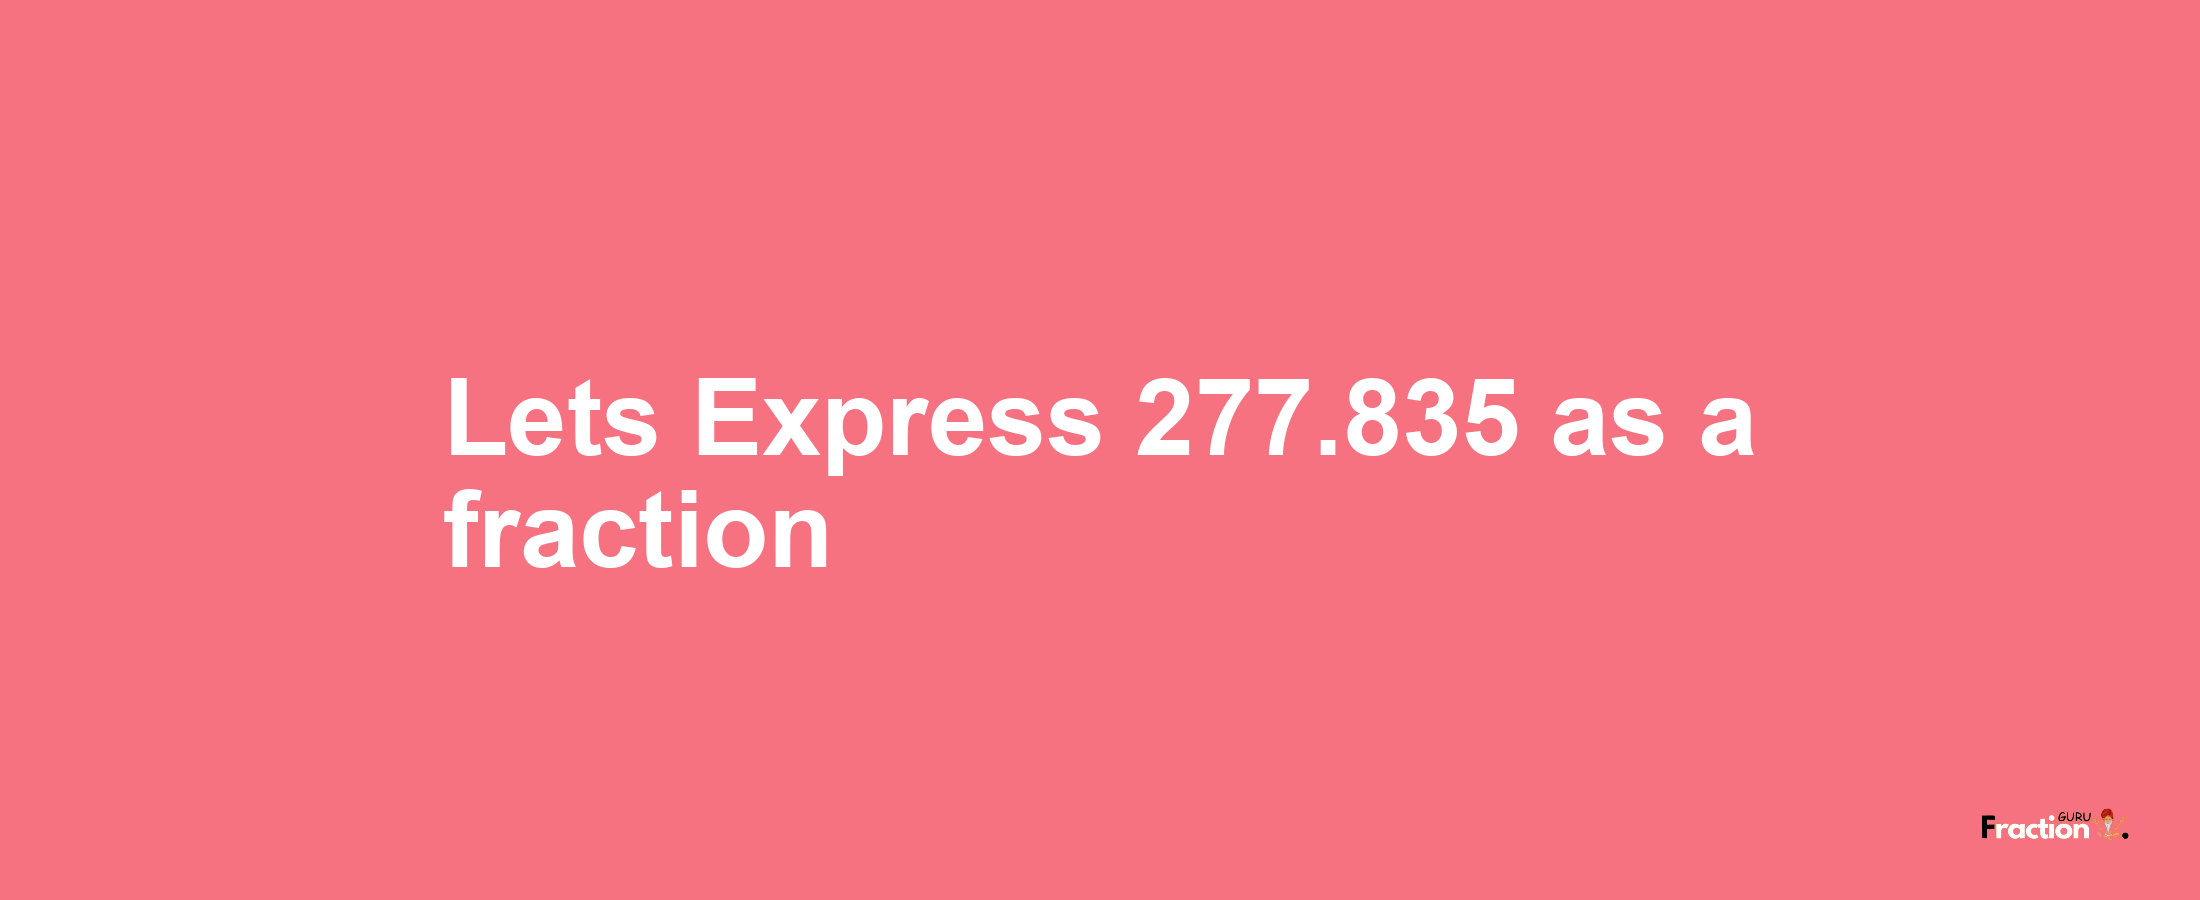 Lets Express 277.835 as afraction